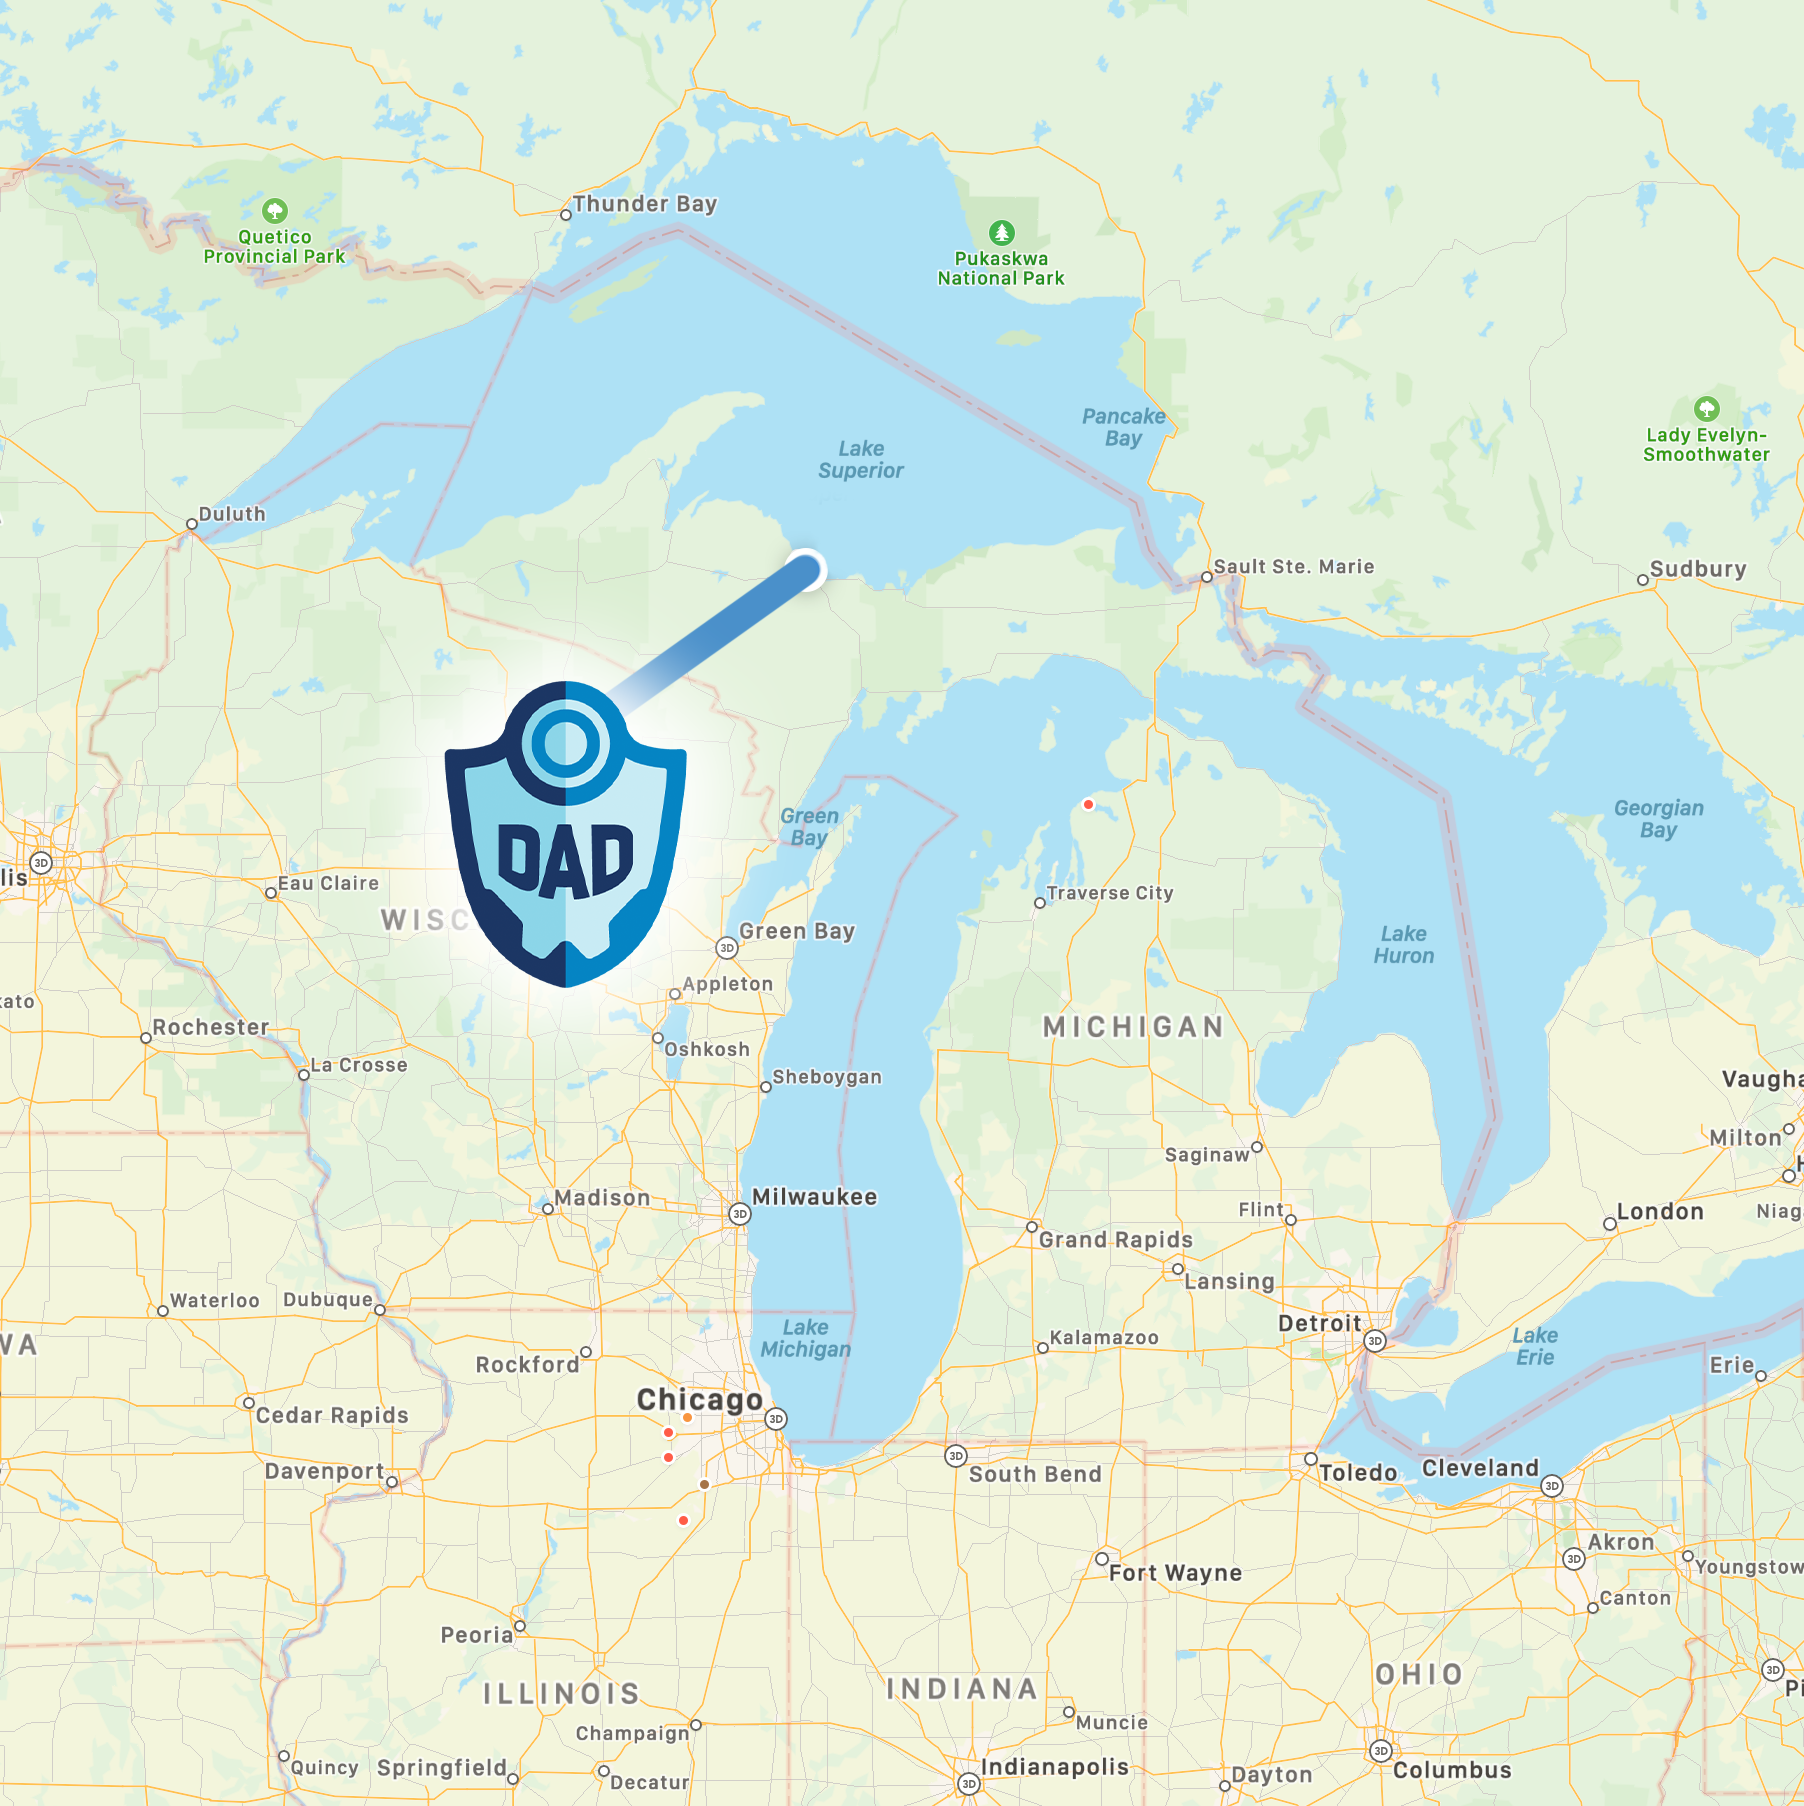 Map of the upper Midwest with DAD logo denoting headquarters location.